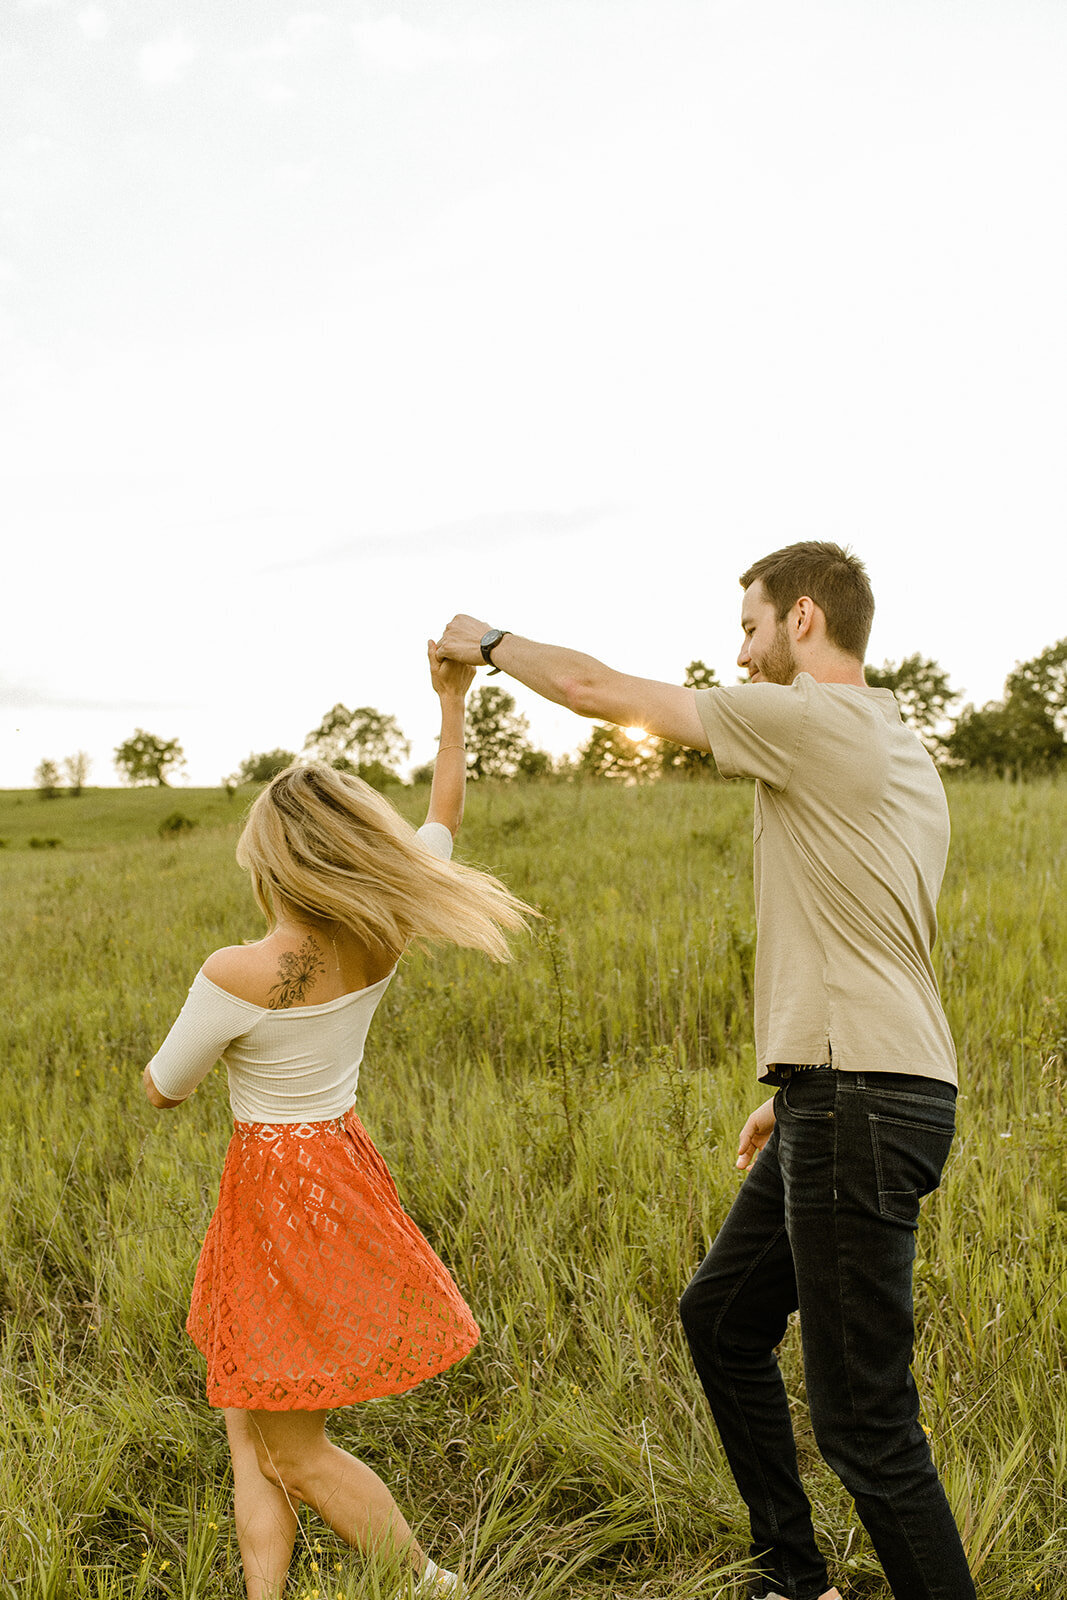 country-cut-flowers-summer-engagement-session-fun-romantic-indie-movie-wanderlust-350